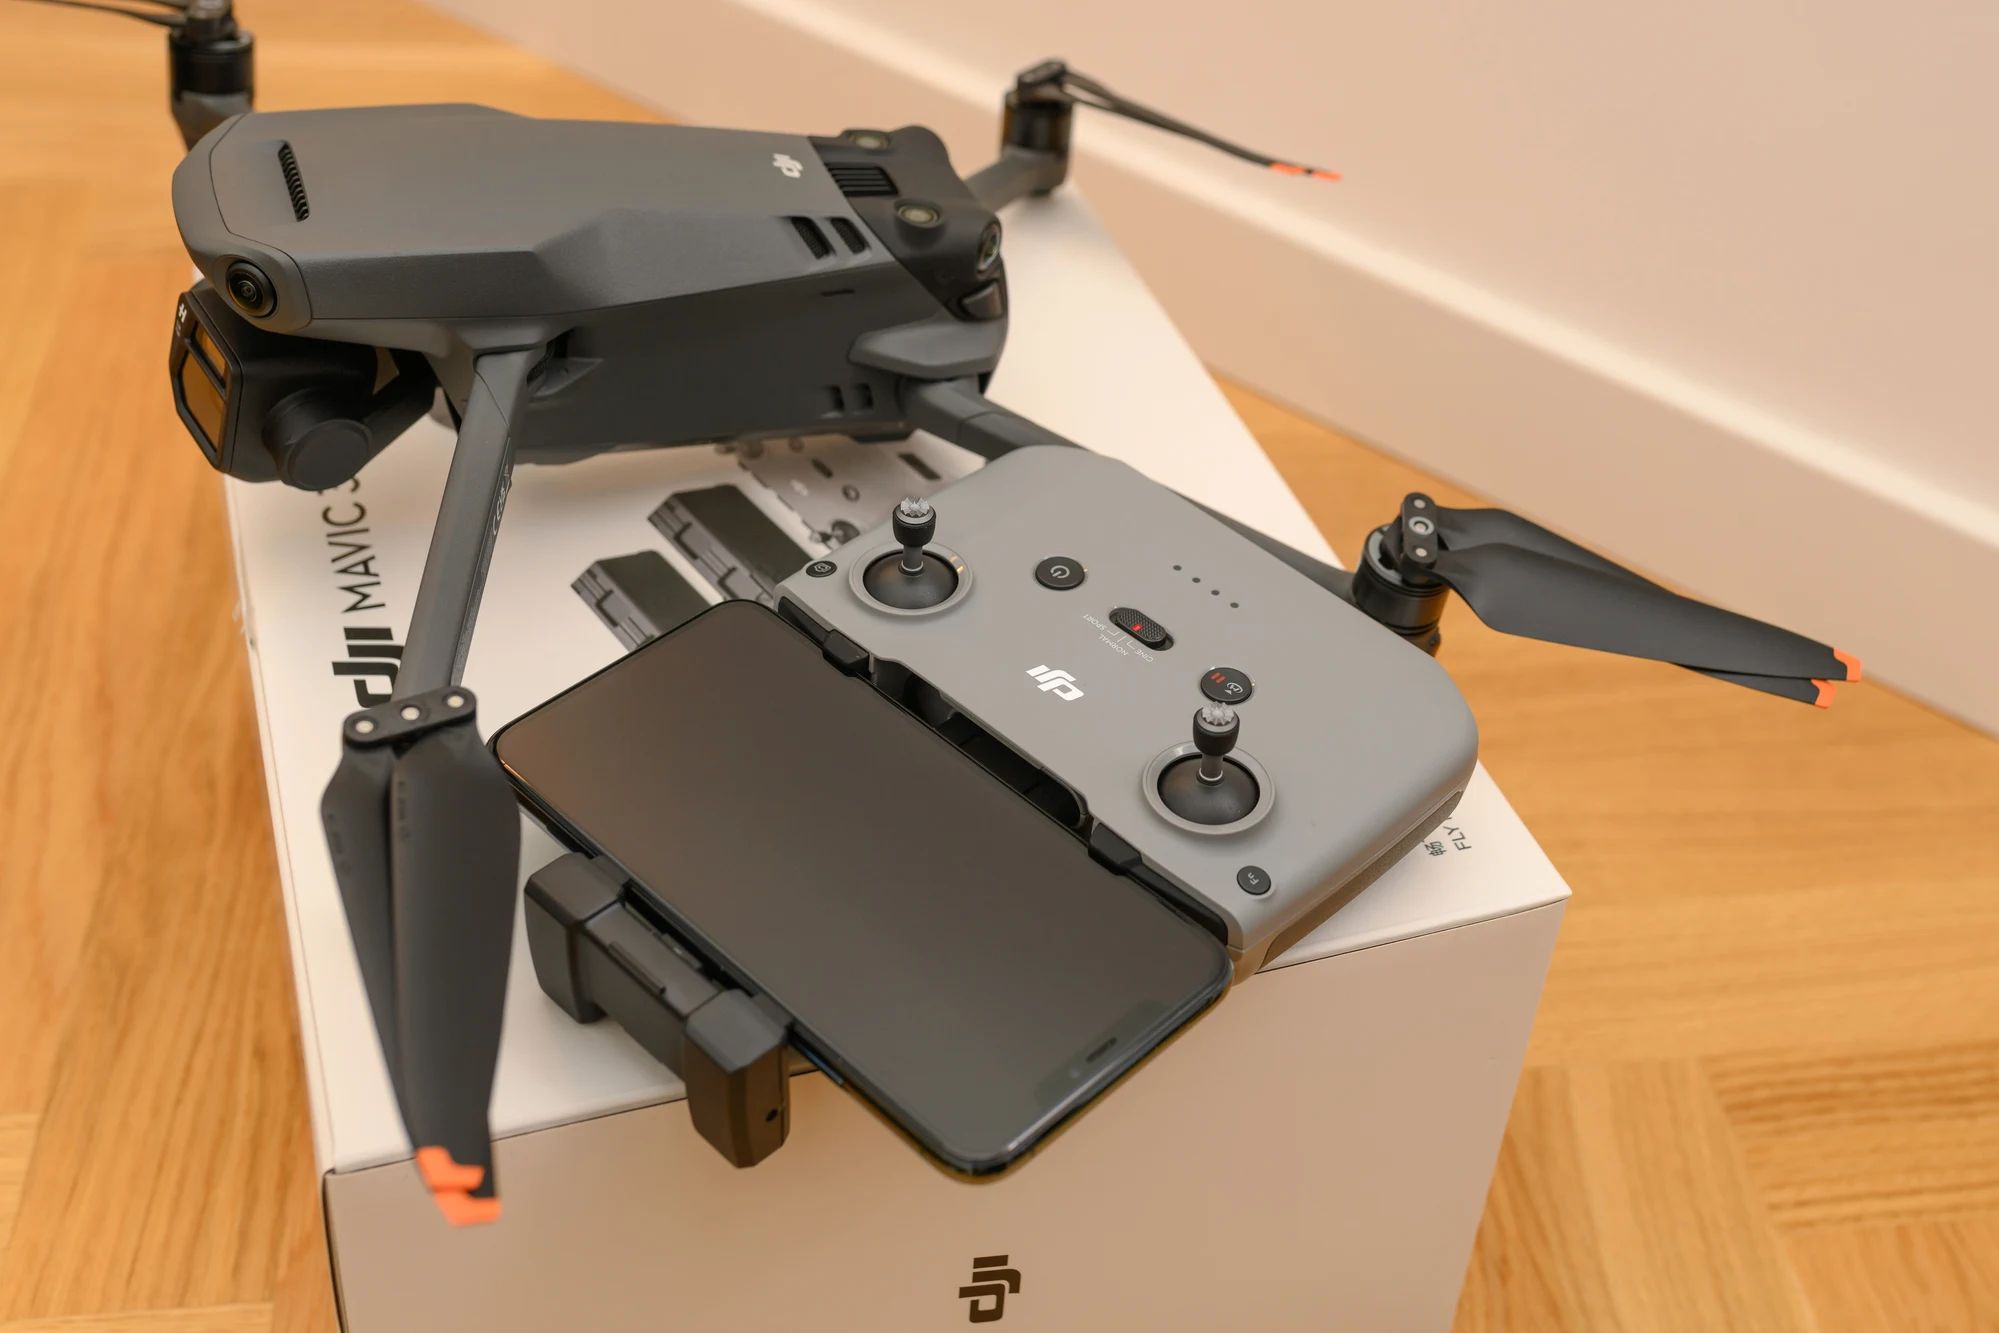 How To Connect To DJI Mavic Pro